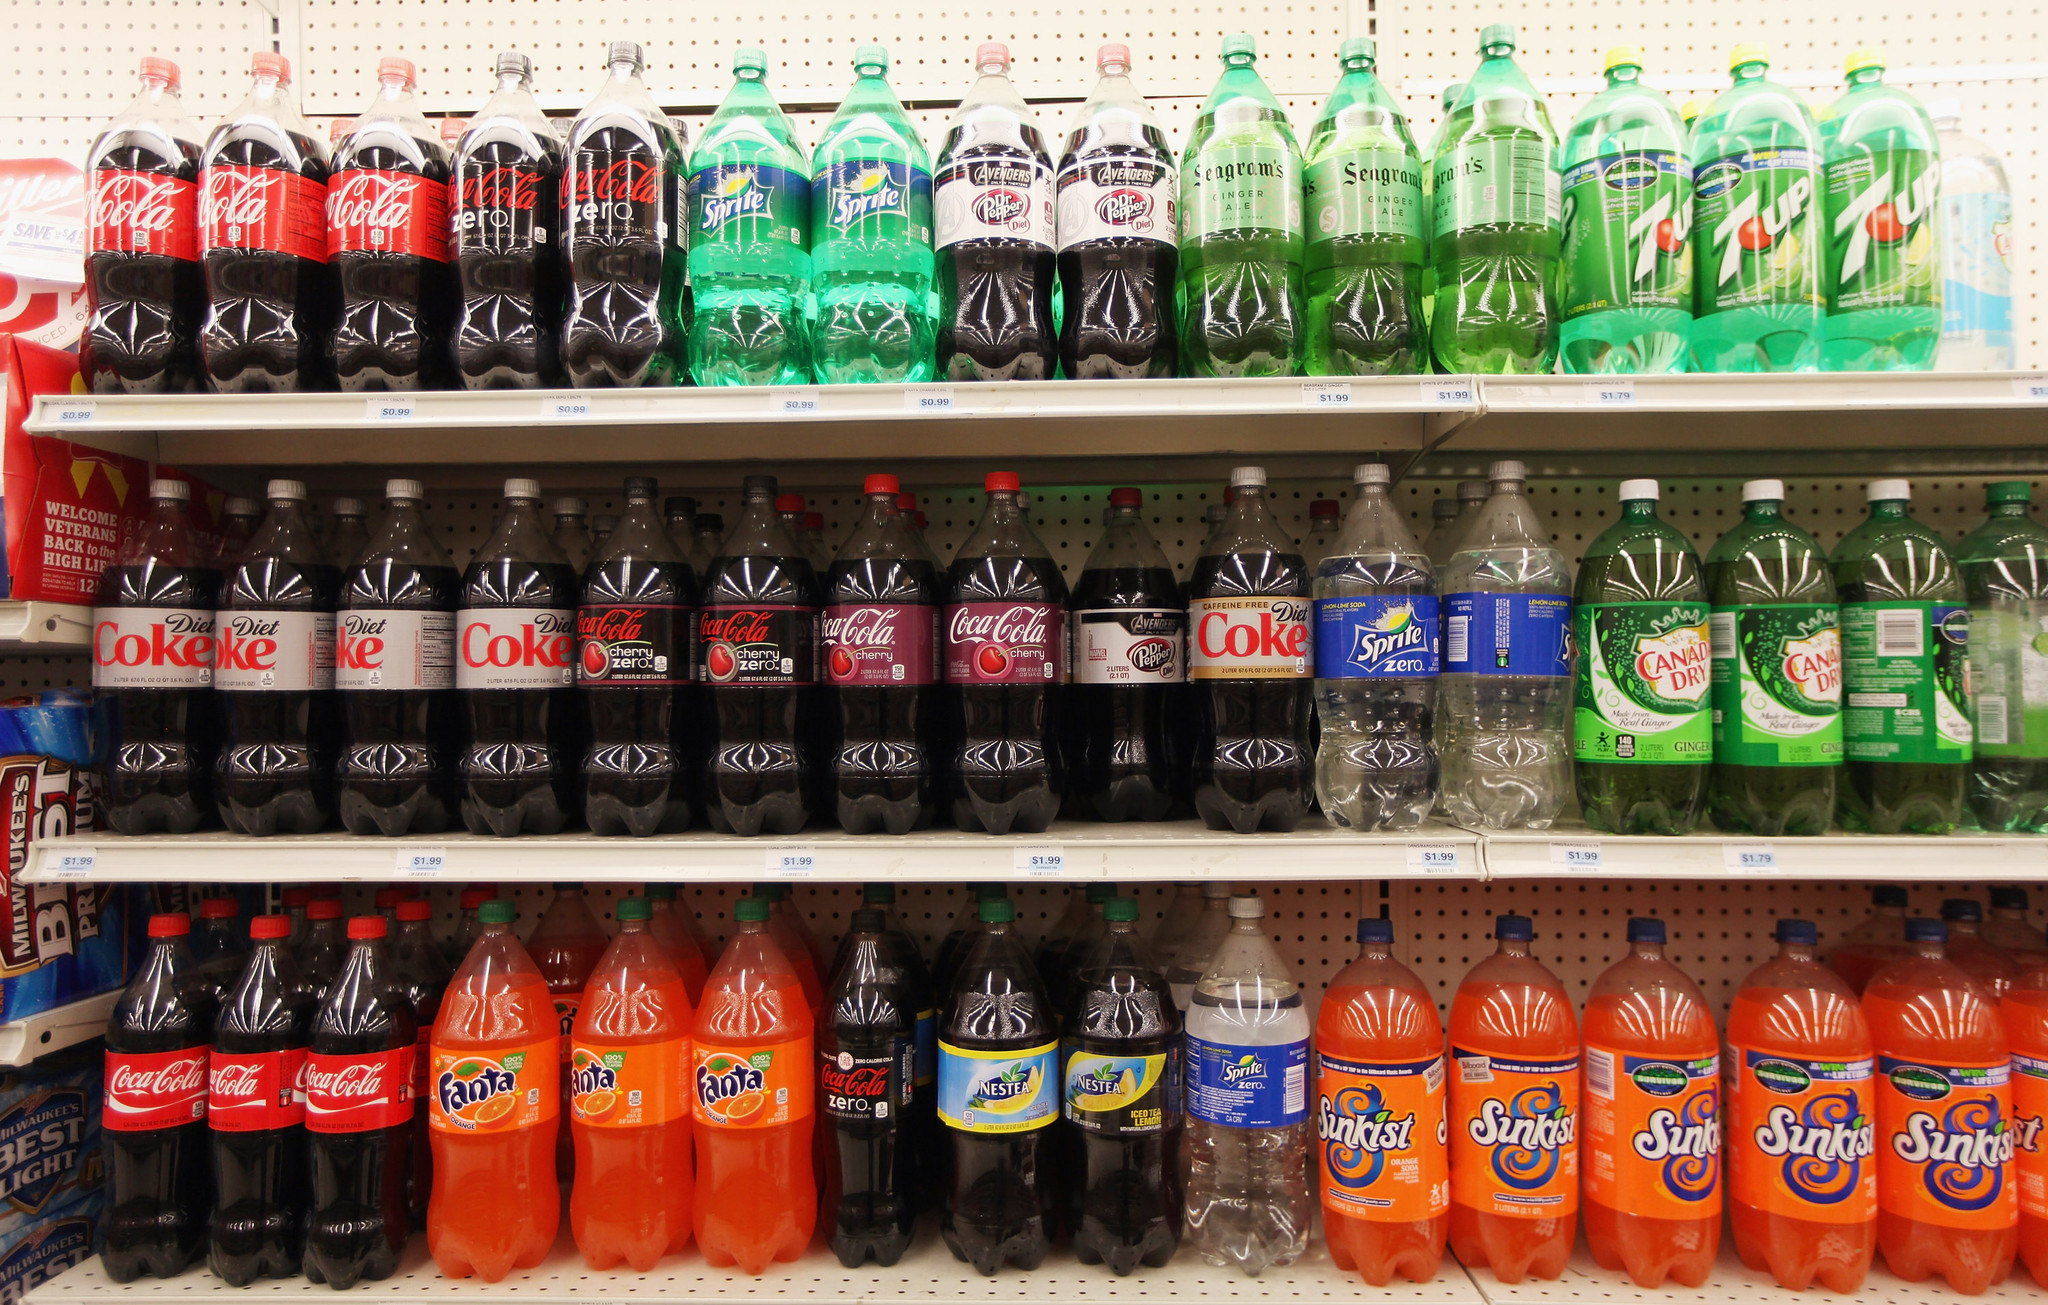 How many steps does a soda cost? Canadian Running Magazine